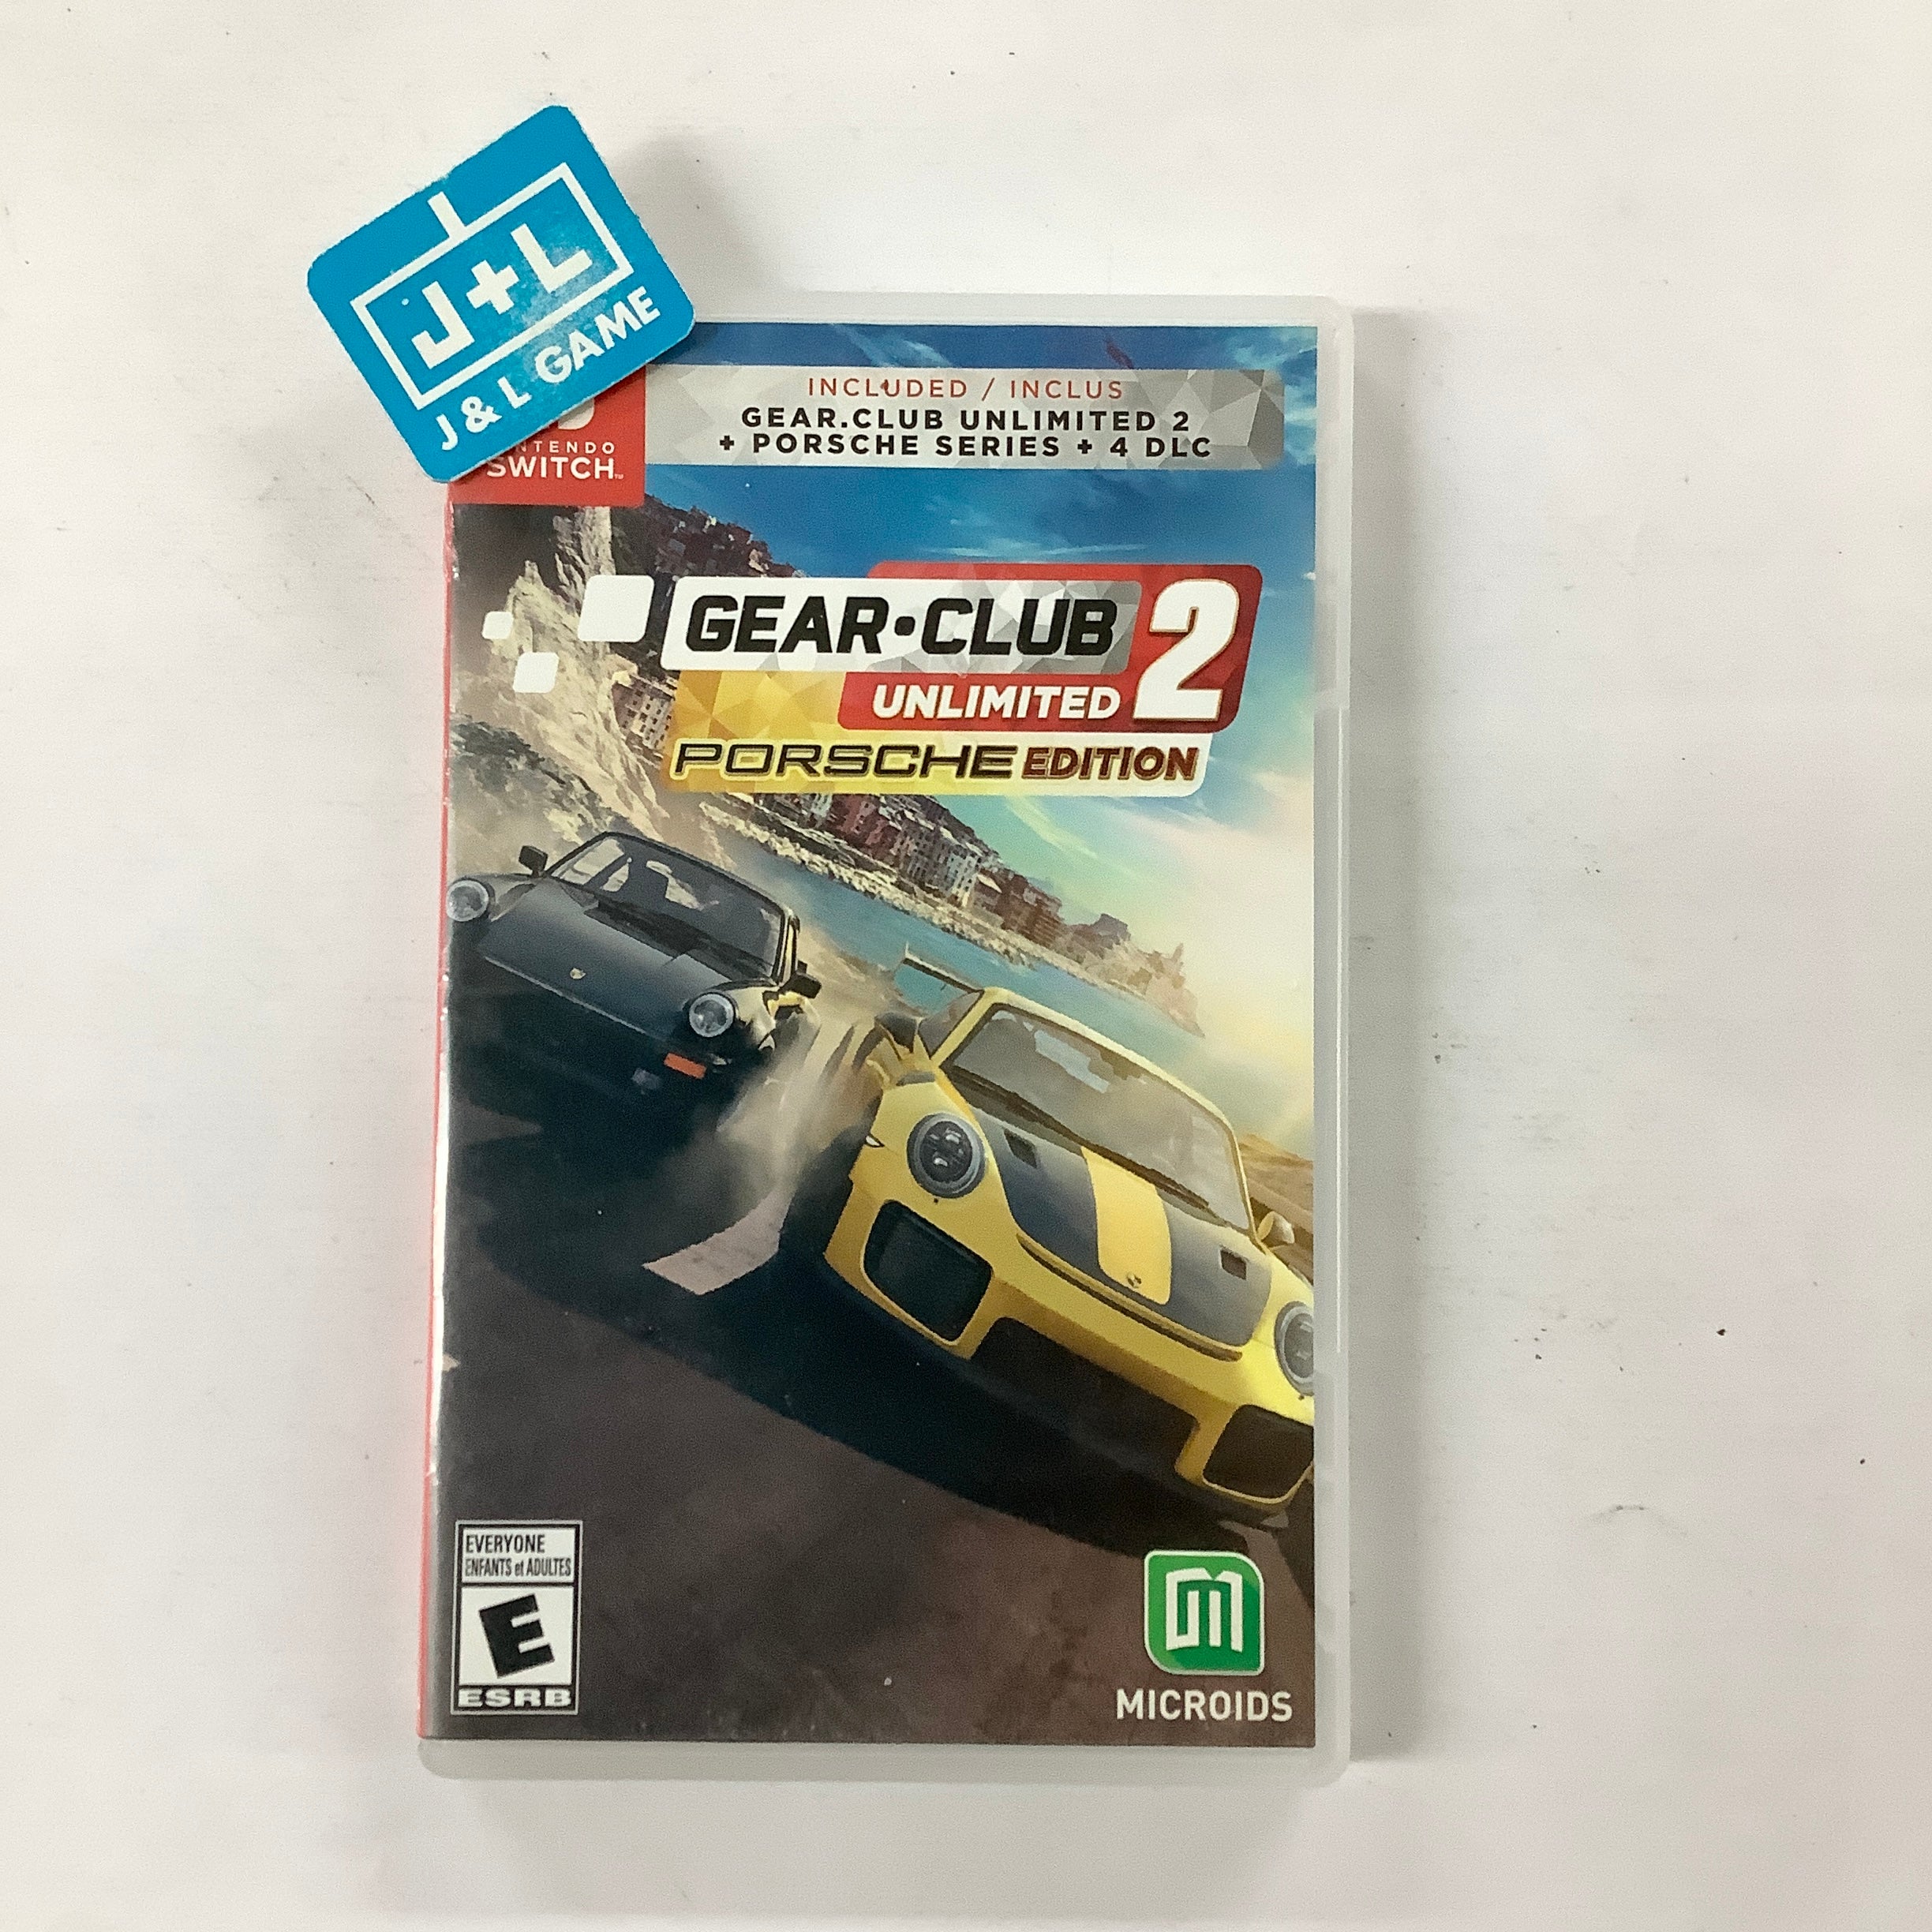 Gear.Club Unlimited 2: Porsche Edition - (NSW) Nintendo Switch [Pre-Owned] Video Games Microids   